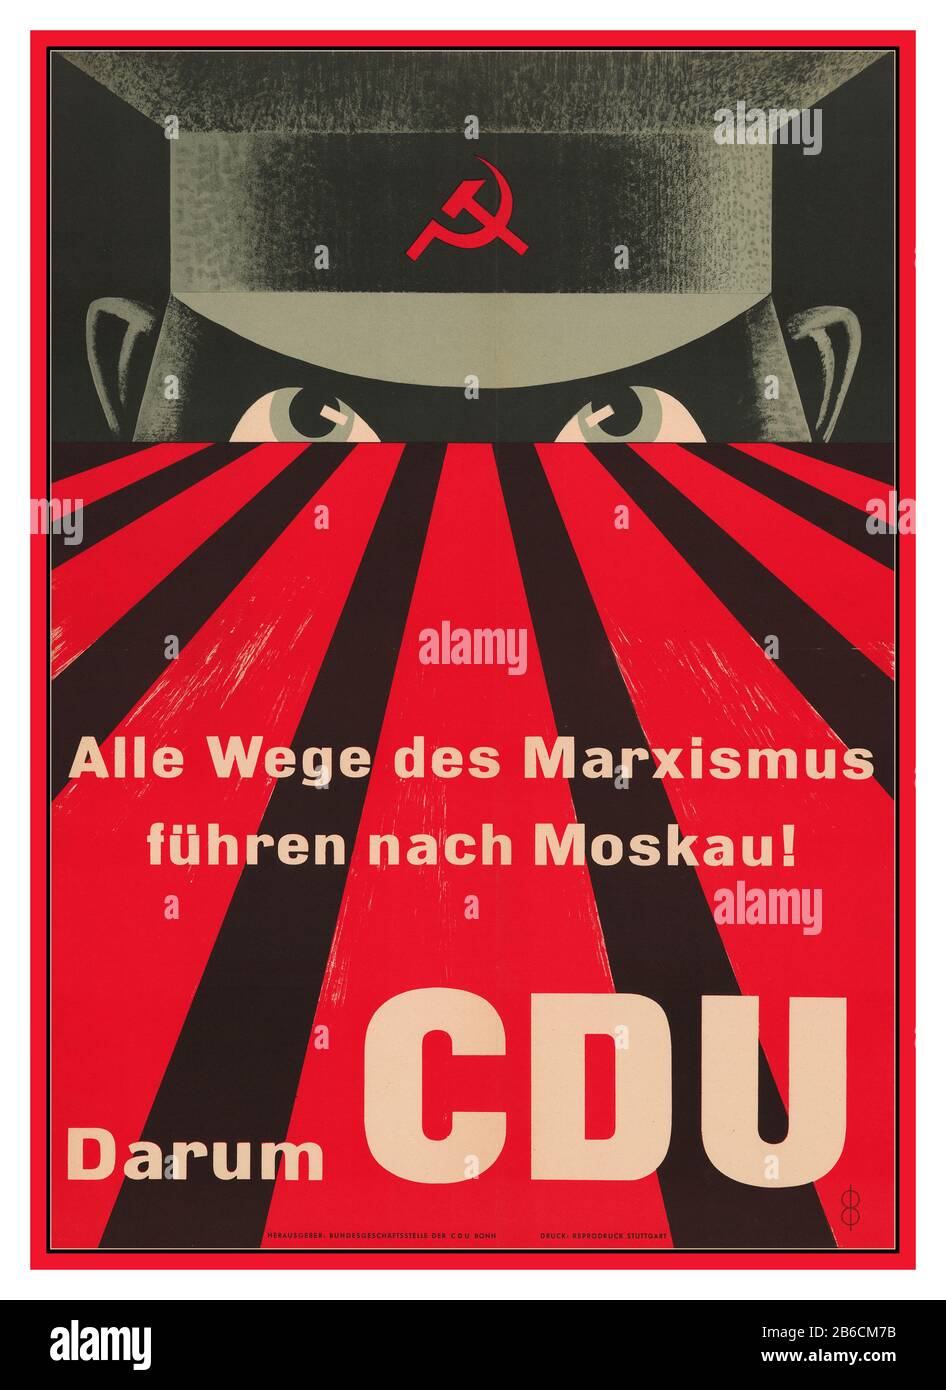 Vintage German Propaganda Poster Anti-communist poster for 1953 federal elections in Germany: 'All ways of Marxism lead to Moscow! Therefore CDU' History Poster and graphic design Political and social posters Germany, propaganda, agitation, USSR, Cold War, election campaign poster, CDU. 'Alle Wege des Marxismus führen nach Moskau' Christlich Demokratische Union Stock Photo